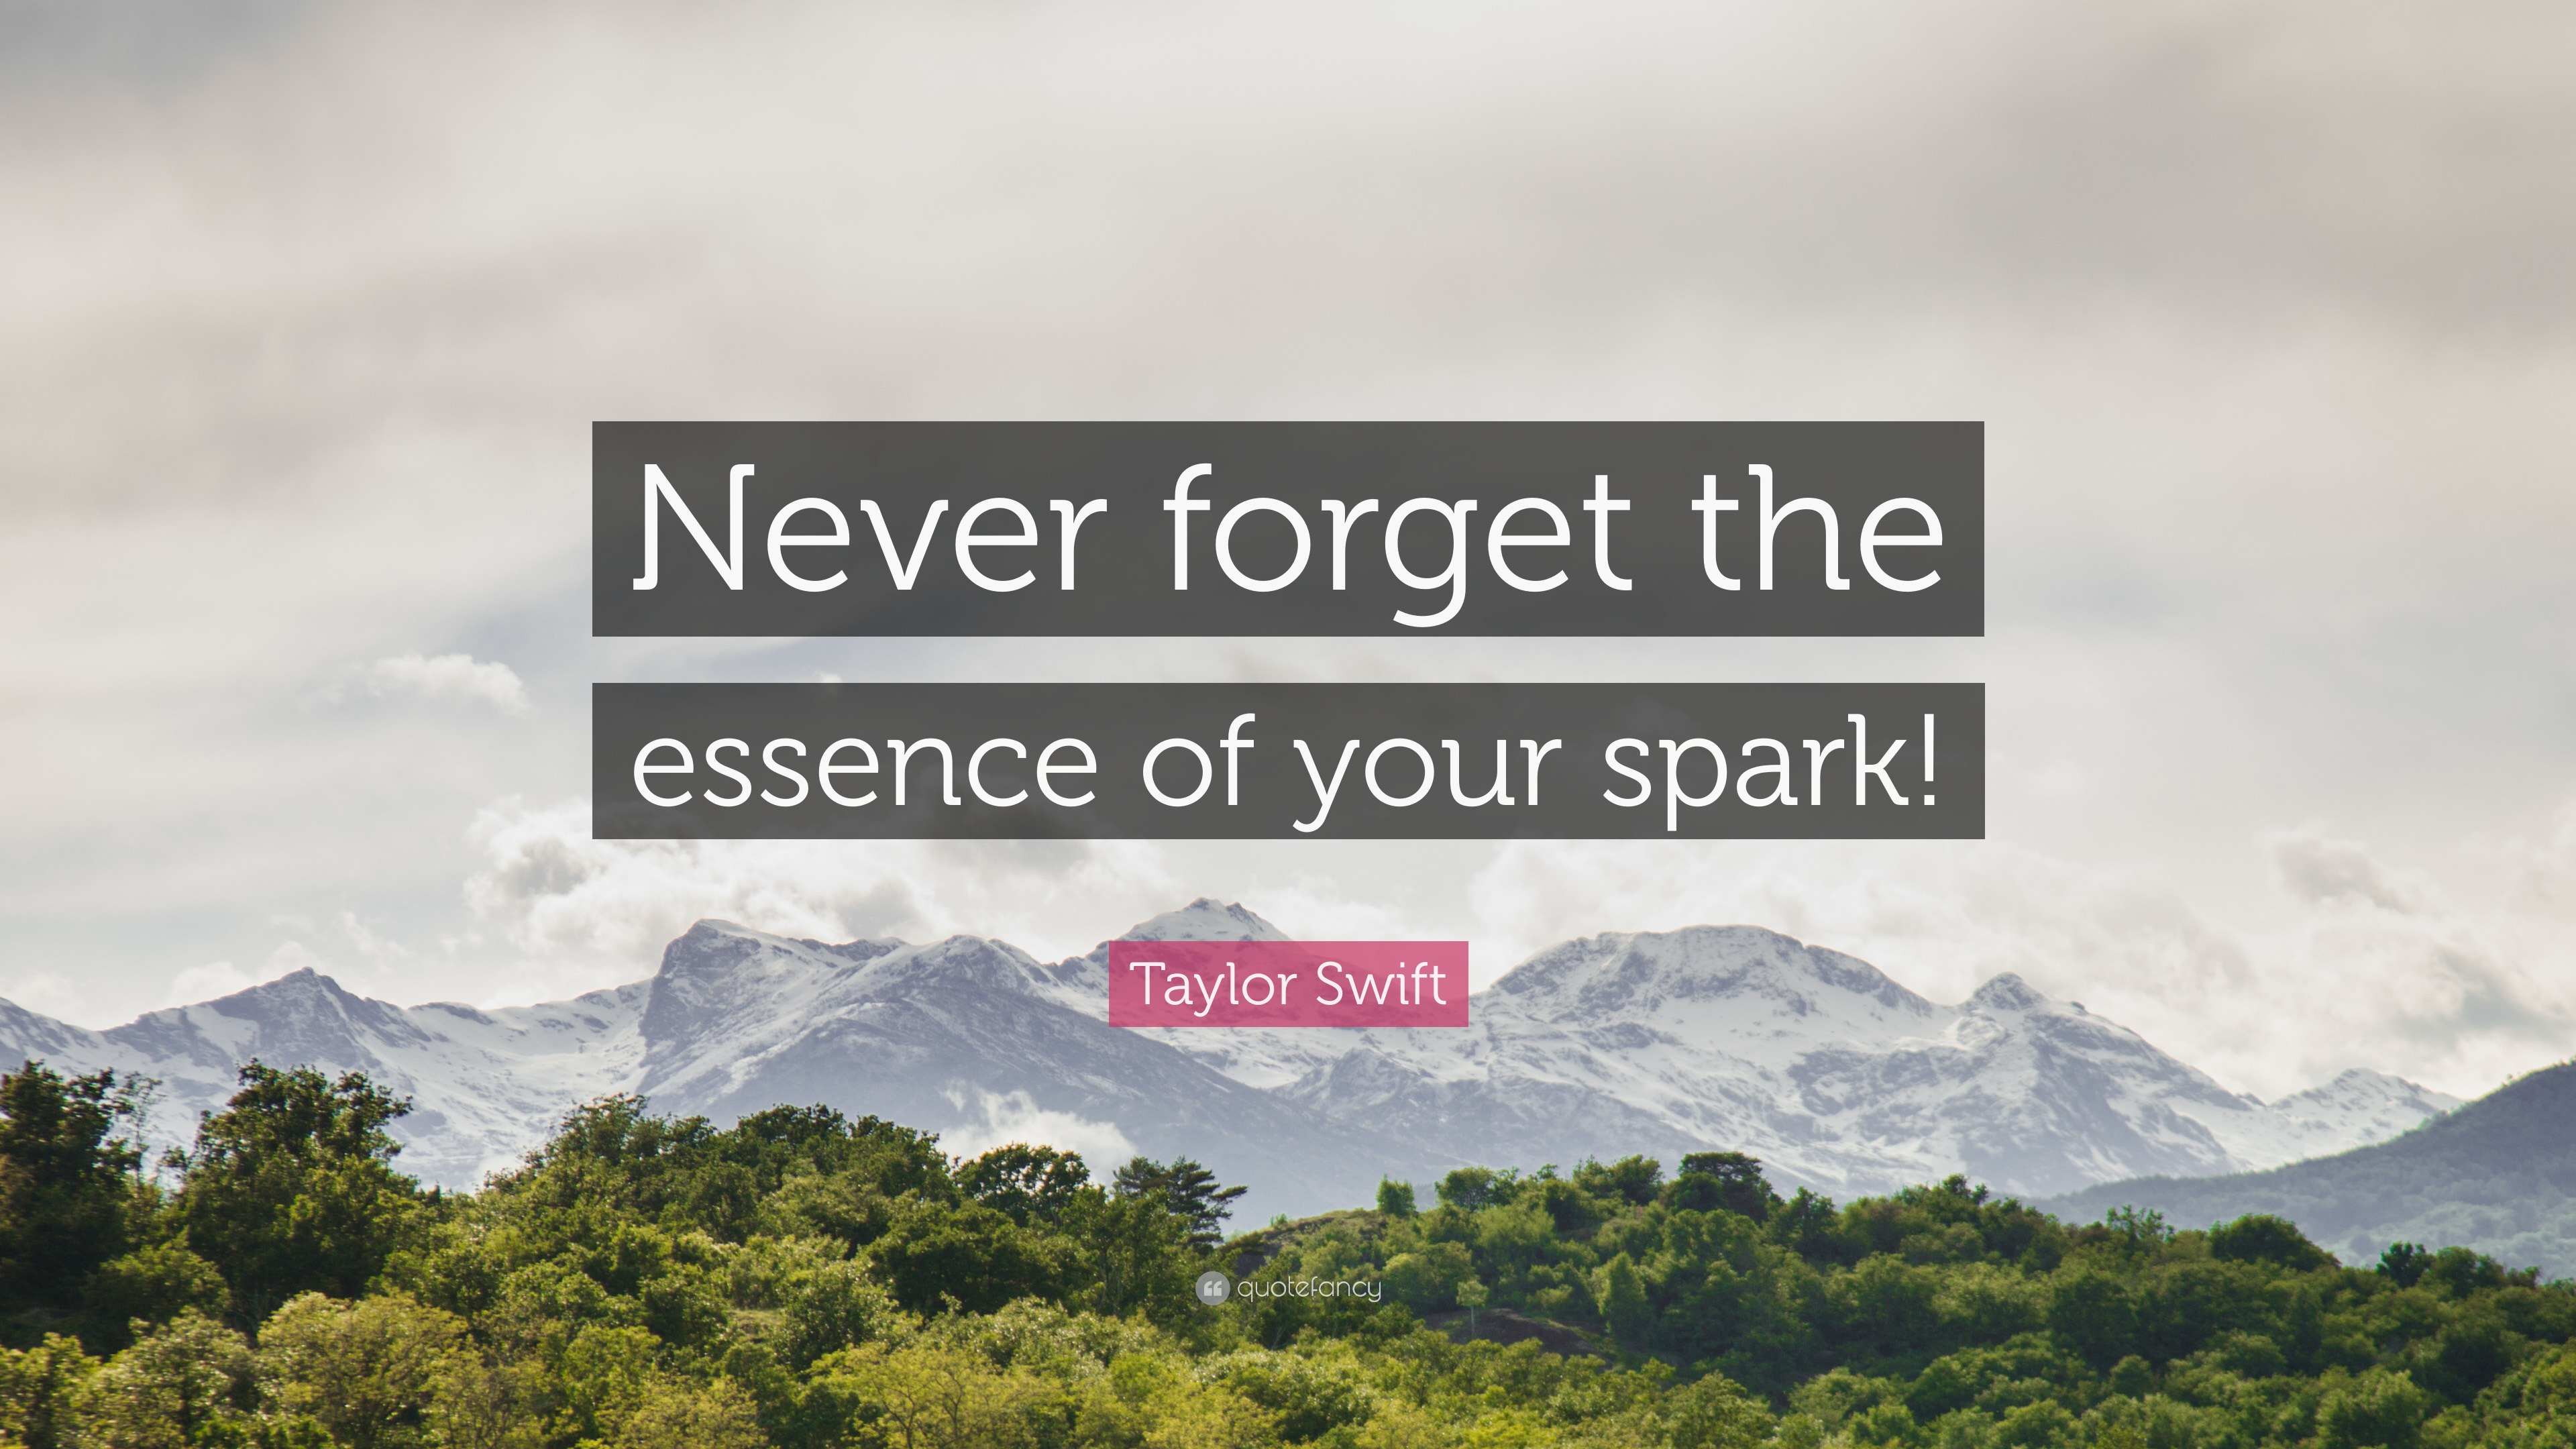 NEVER FORGET THE ESSENCE OF YOUR SPARK